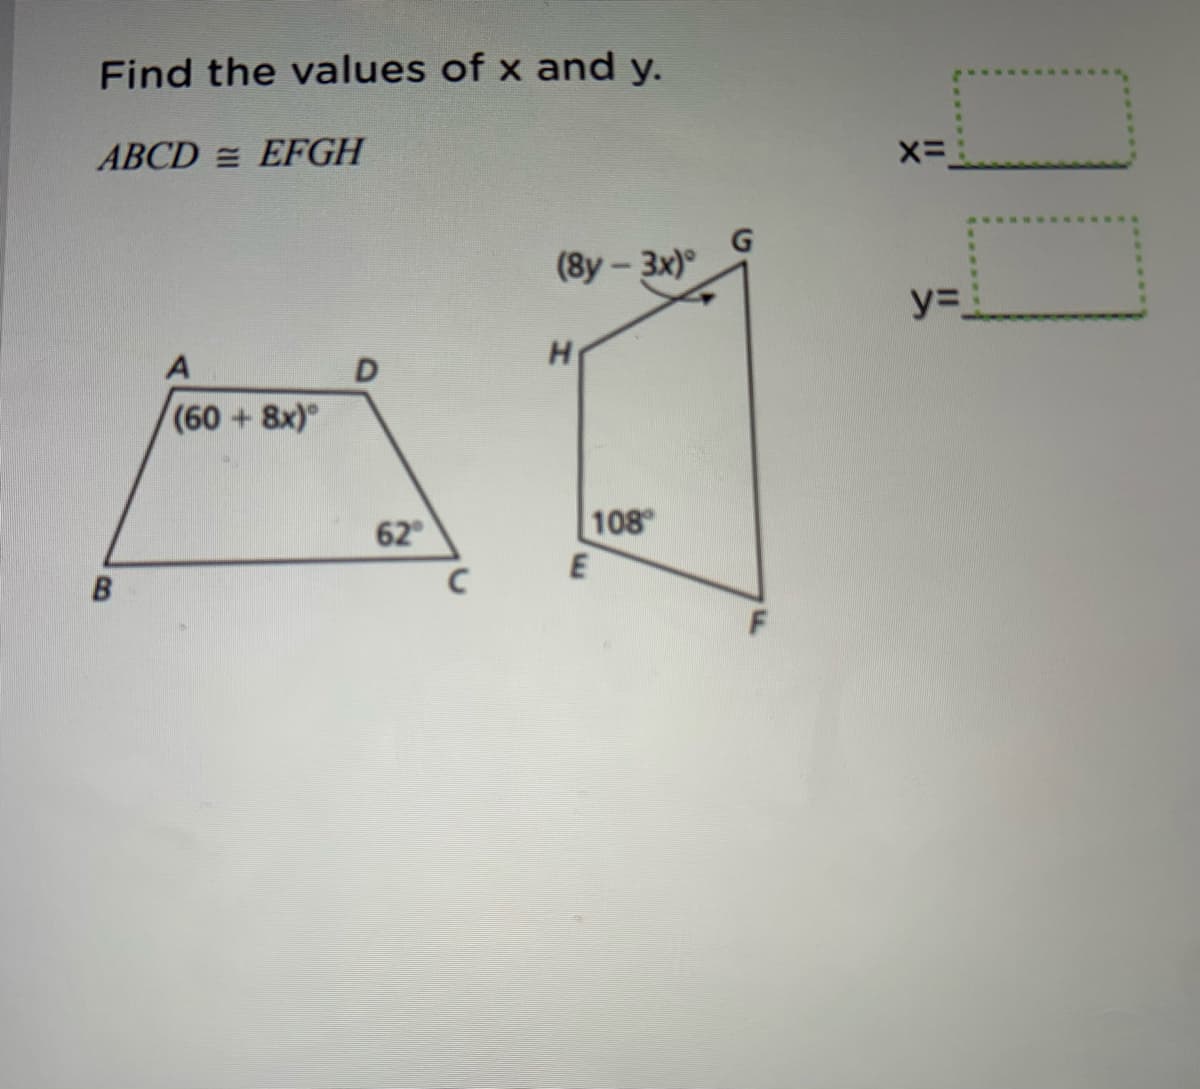 Find the values of x and y.
ABCD = EFGH
(8y-3x)
%=.
(60+8x)°
62
108
